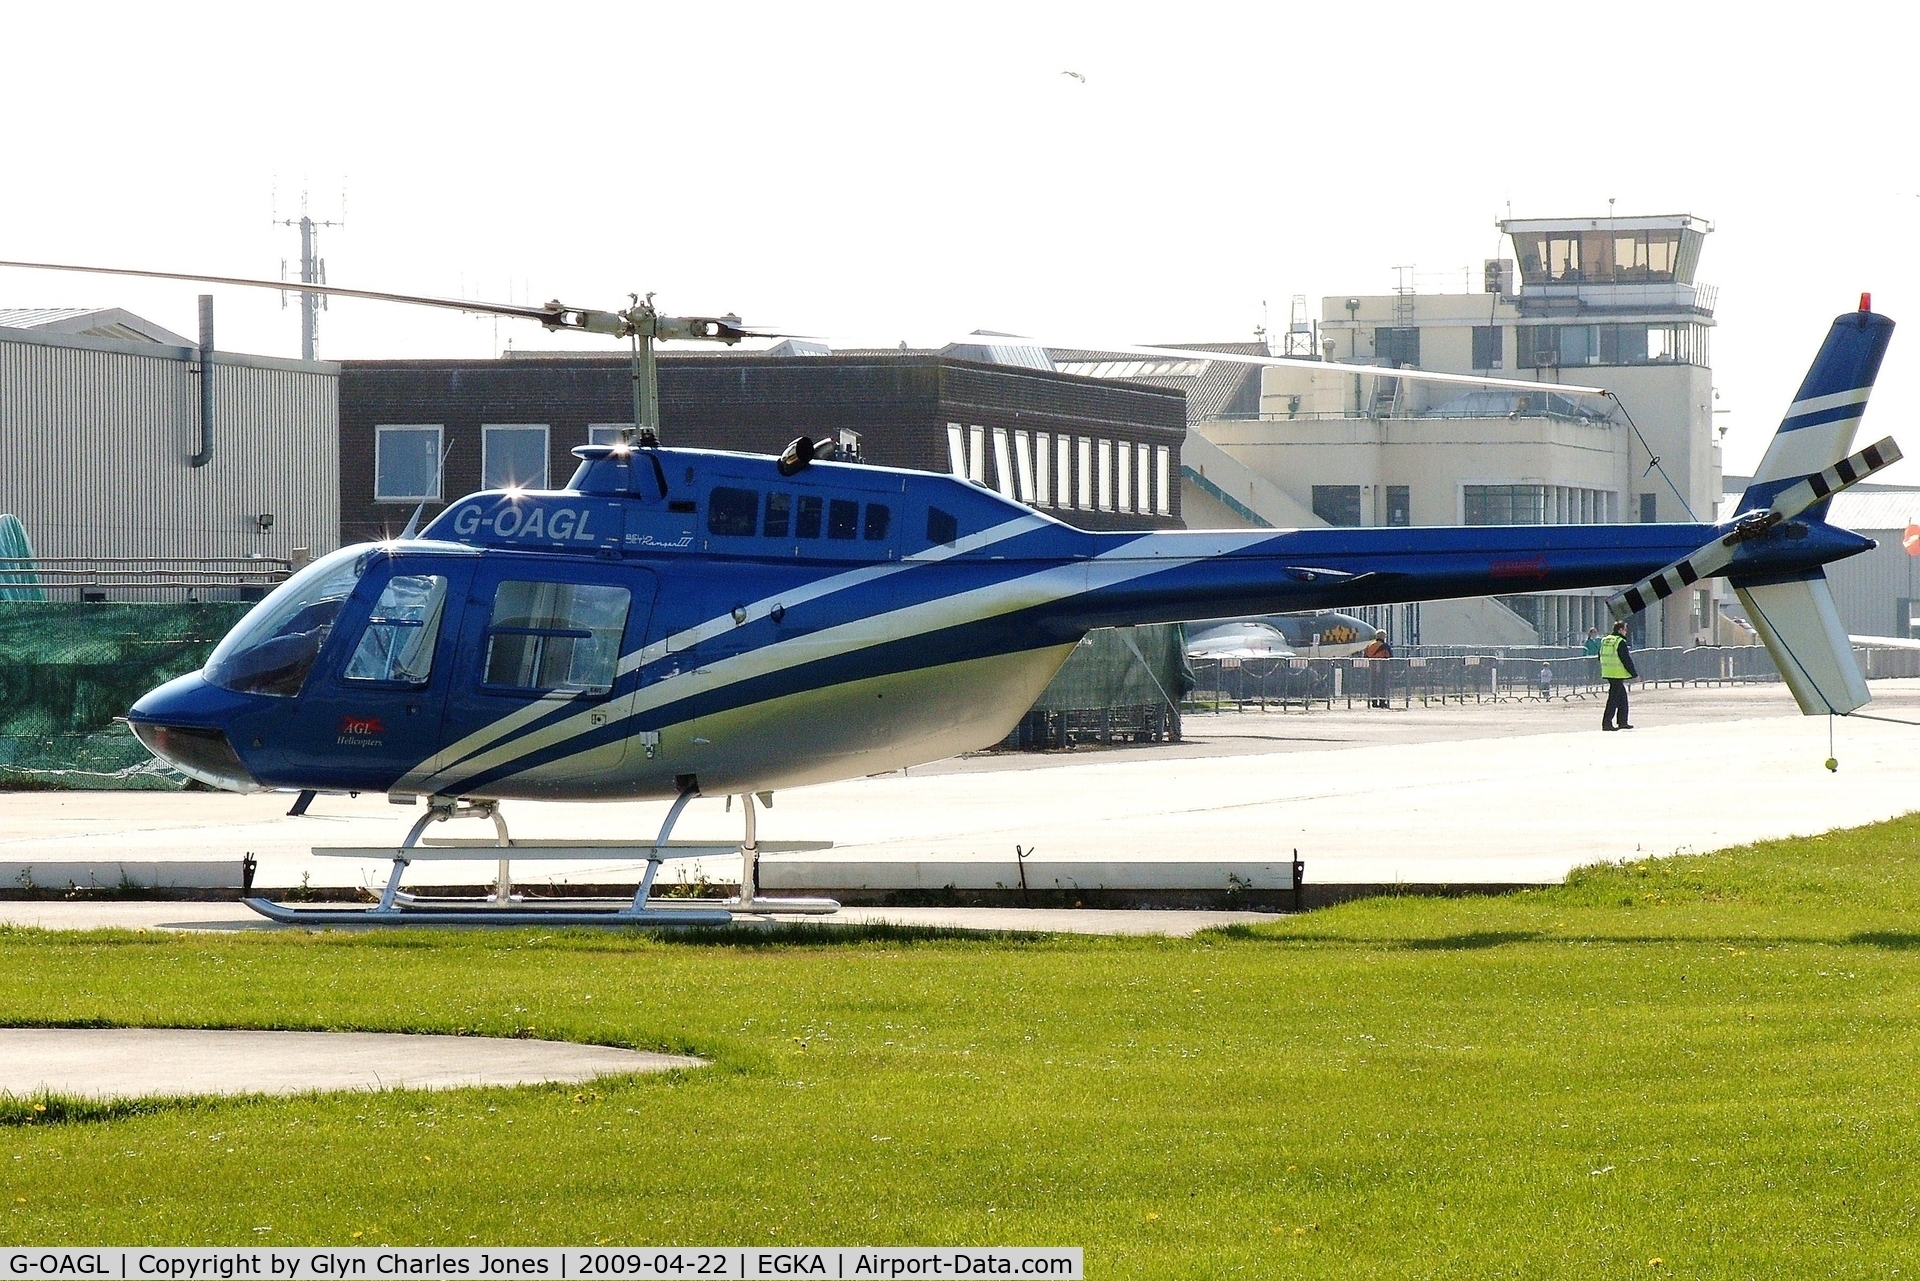 G-OAGL, 1980 Bell 206B JetRanger III C/N 3035, Previously G-CORN, G-BHTR and N18098. Owned by AGL Helicopters.